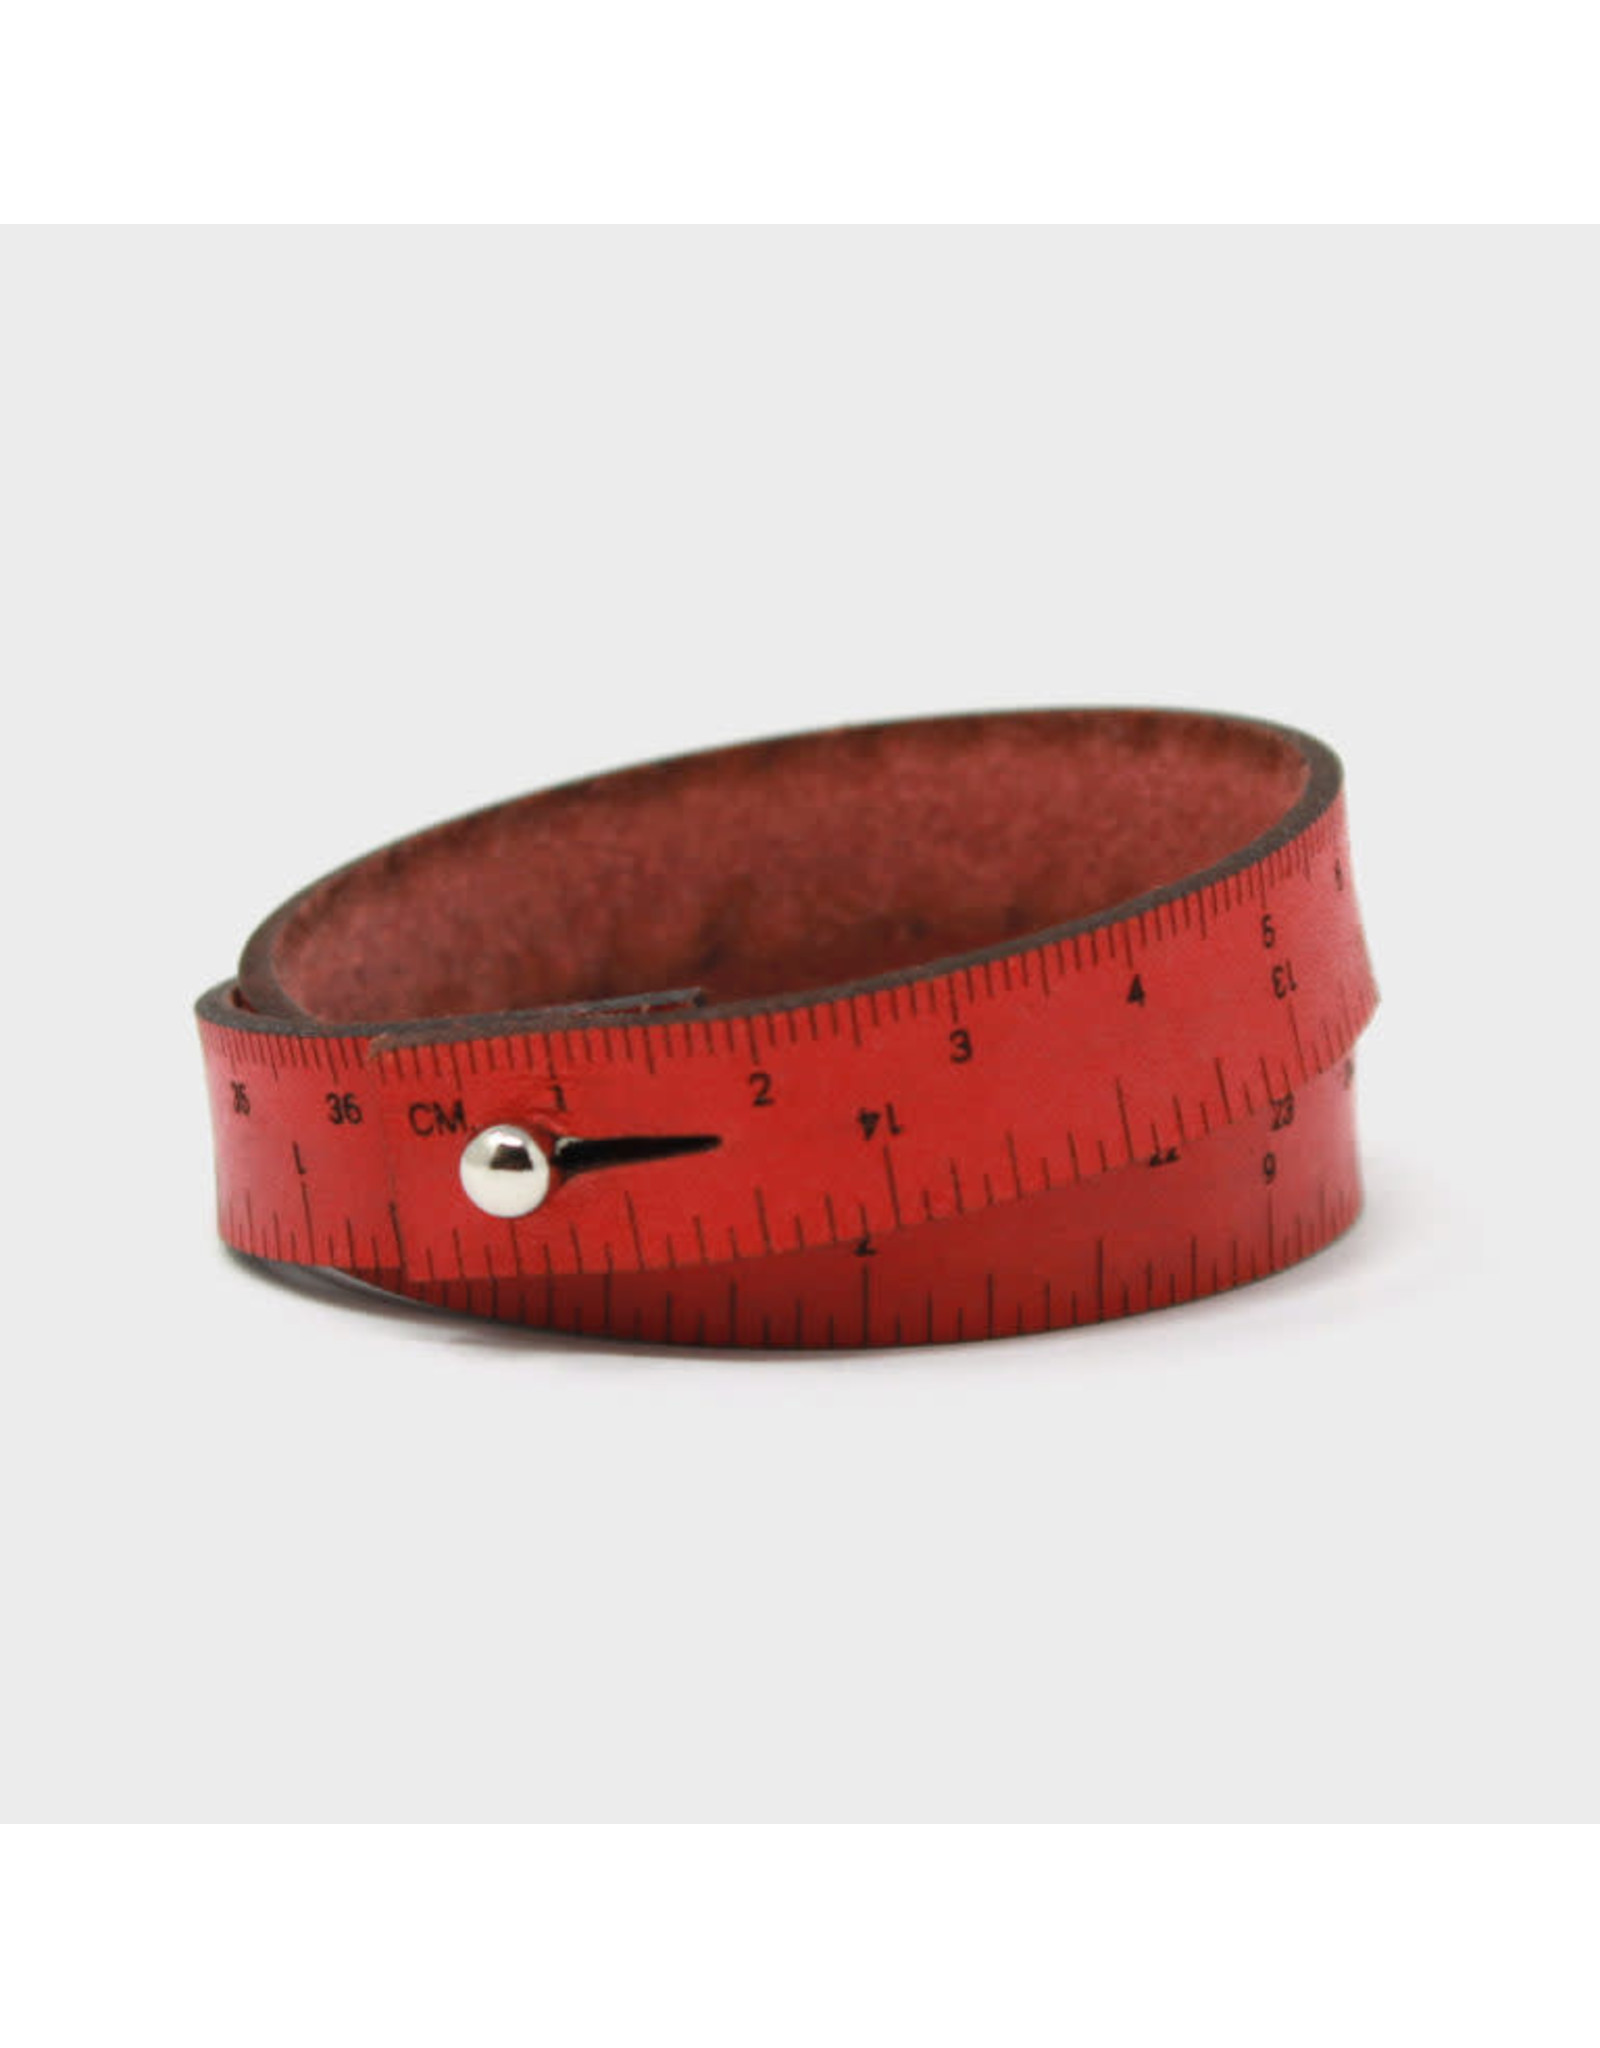 Wrist Ruler - RED - 16 inches